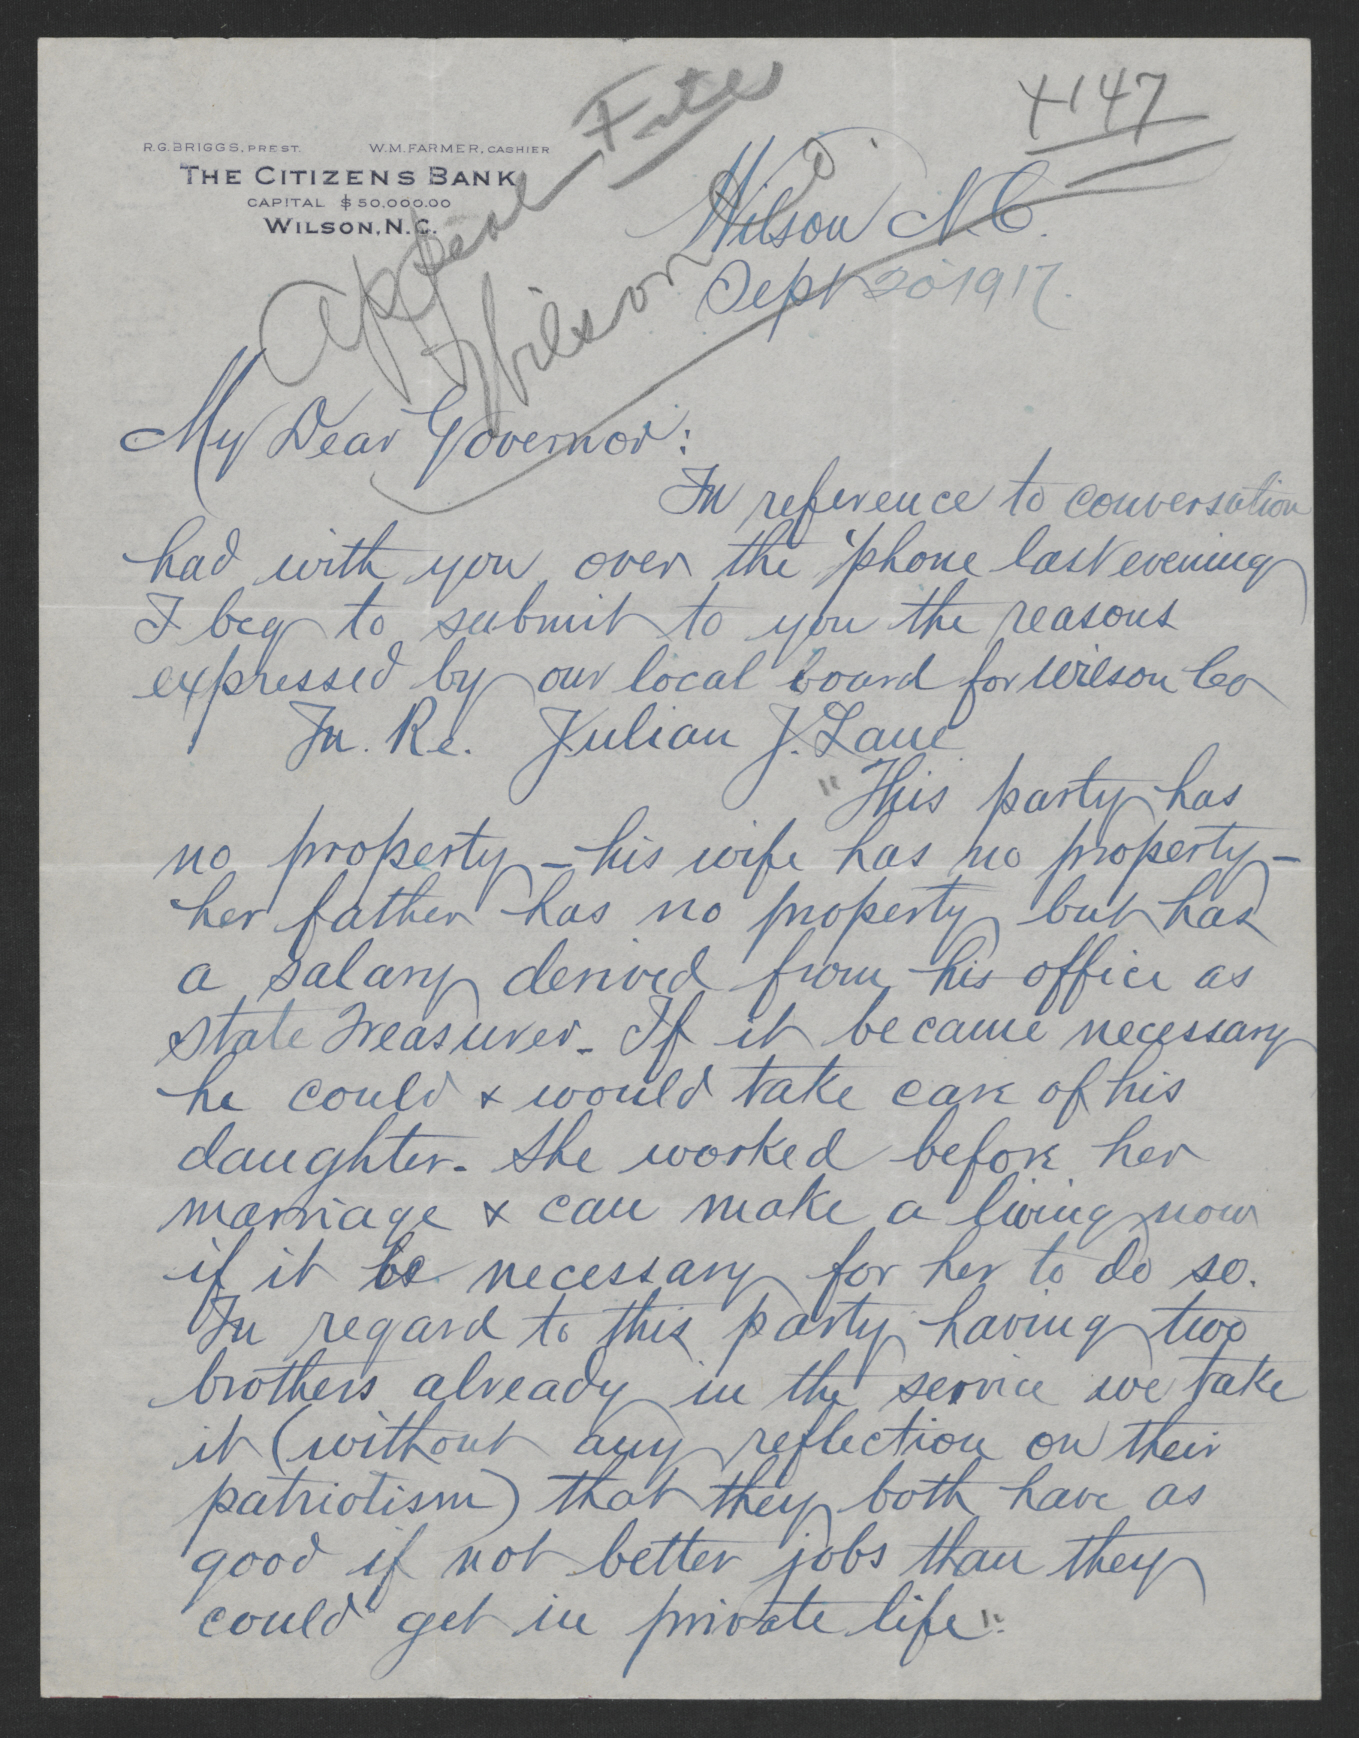 Letter from Roscoe G. Briggs to Thomas W. Bickett, September 20, 1917, page 1